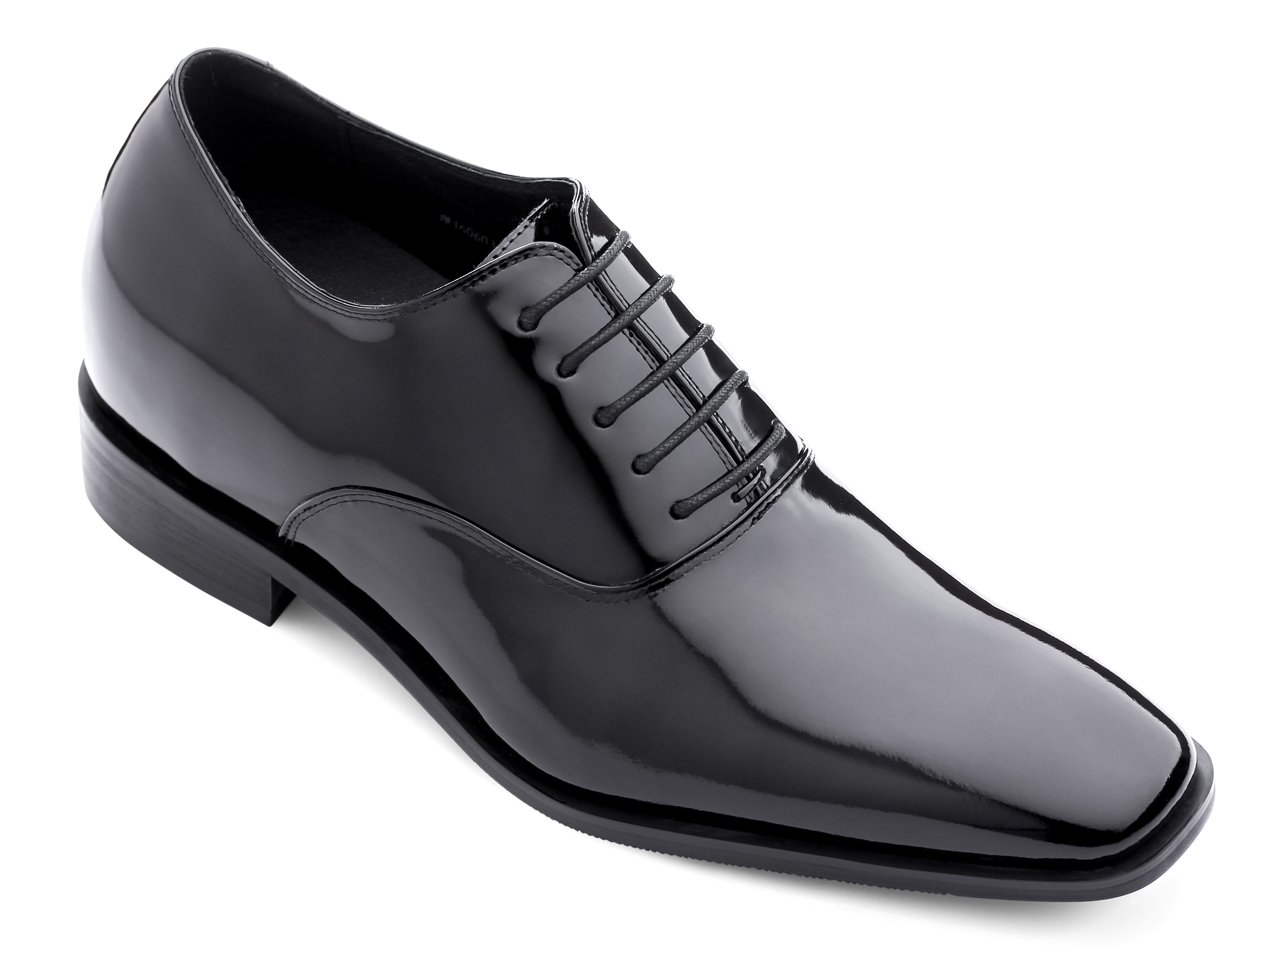 TOTO Men's Invisible Height Increasing Elevator Shoes - Black Patent Leather Lace-up Formal Oxfords - 3 Inches Taller - H6532B